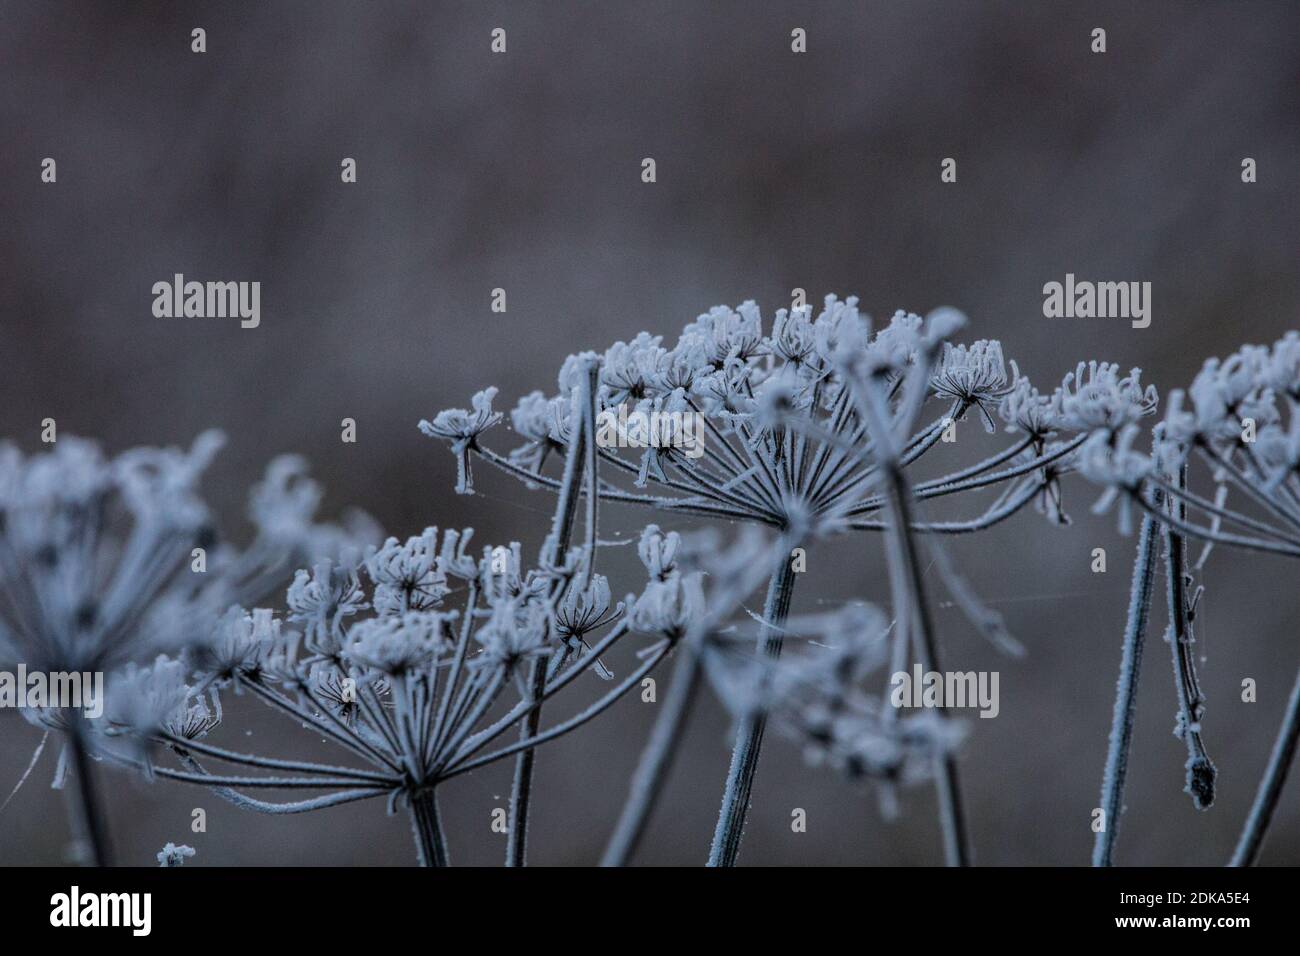 Close-up Of Frozen Plants Against Snow Stock Photo